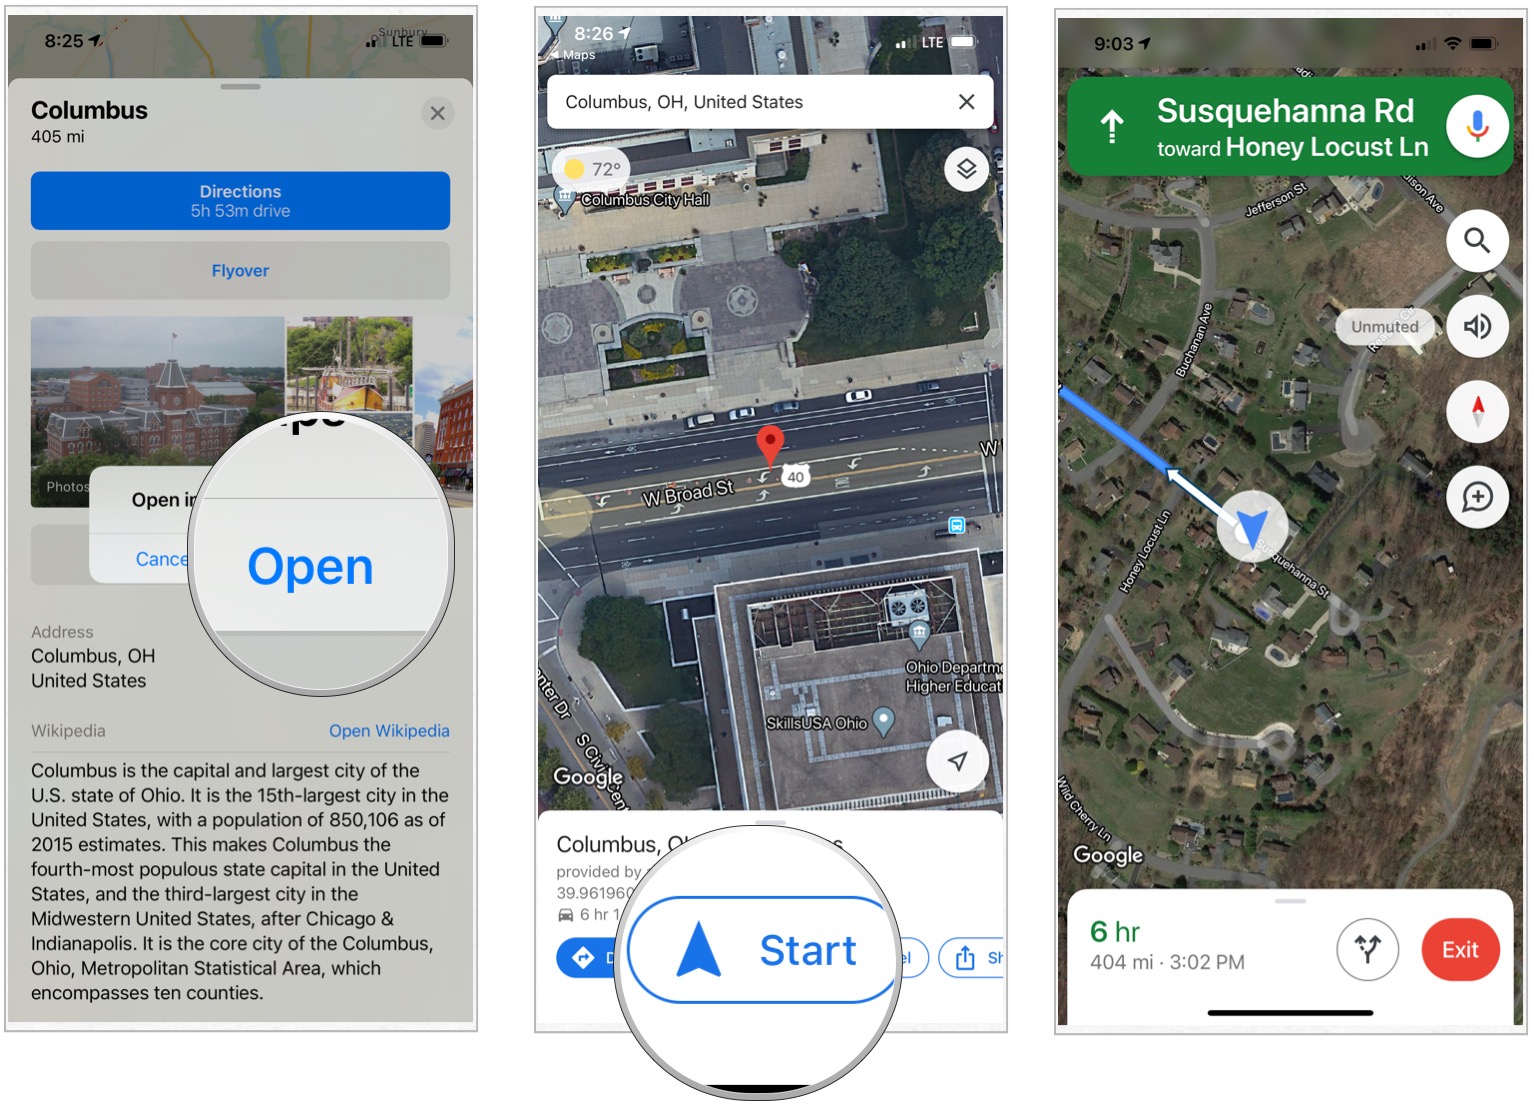 Confirm you want to open the directions in Google Maps. In Google Maps, tap Start to begin your journey.